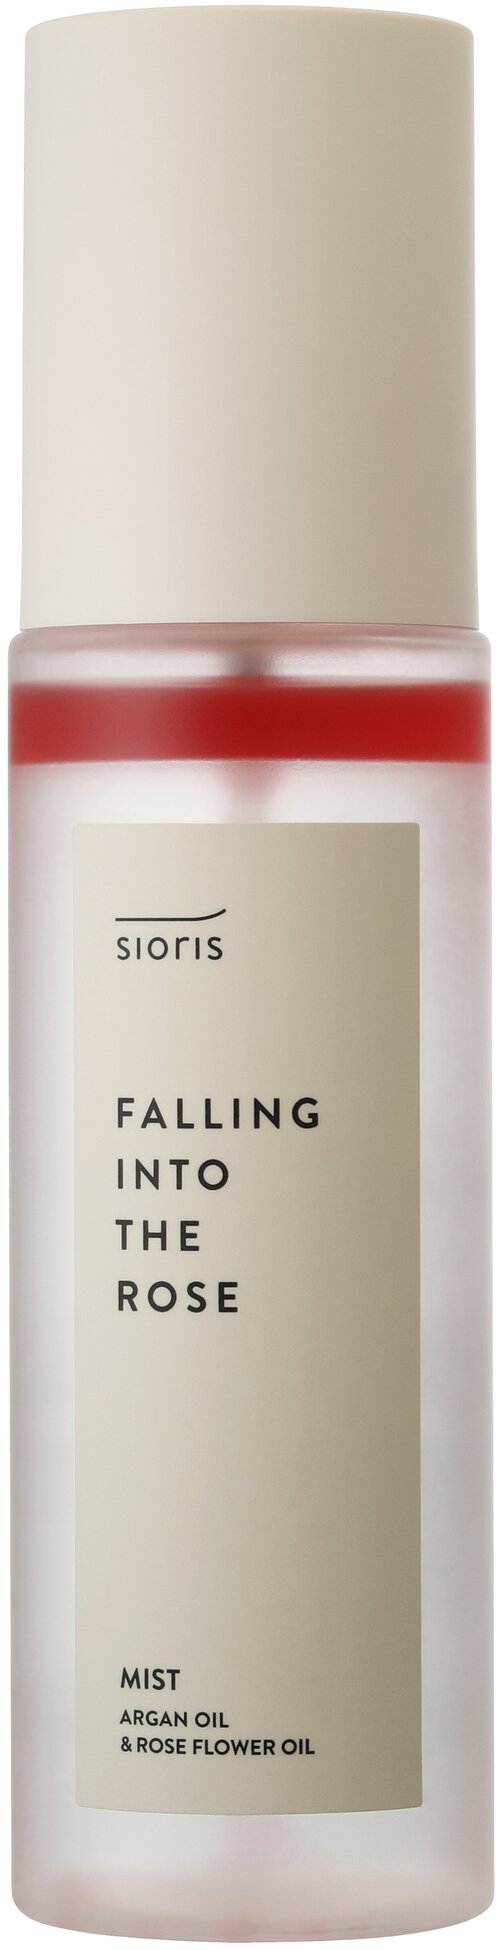 Falling into the rose 100 ml